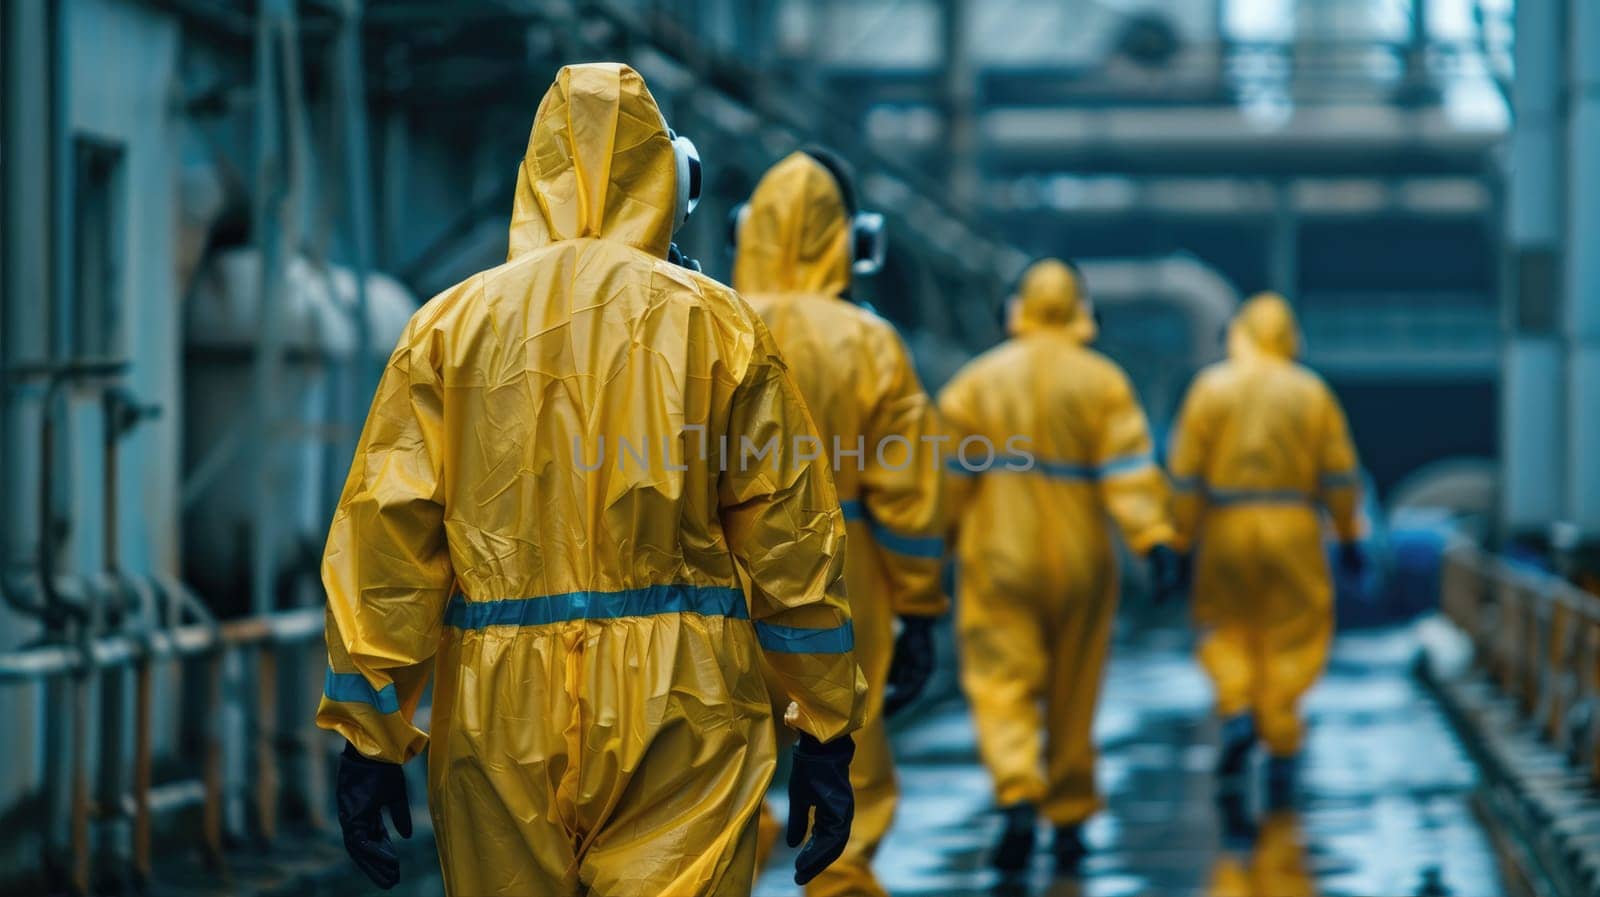 Workers in yellow hazmat suits walking down a hallway by natali_brill